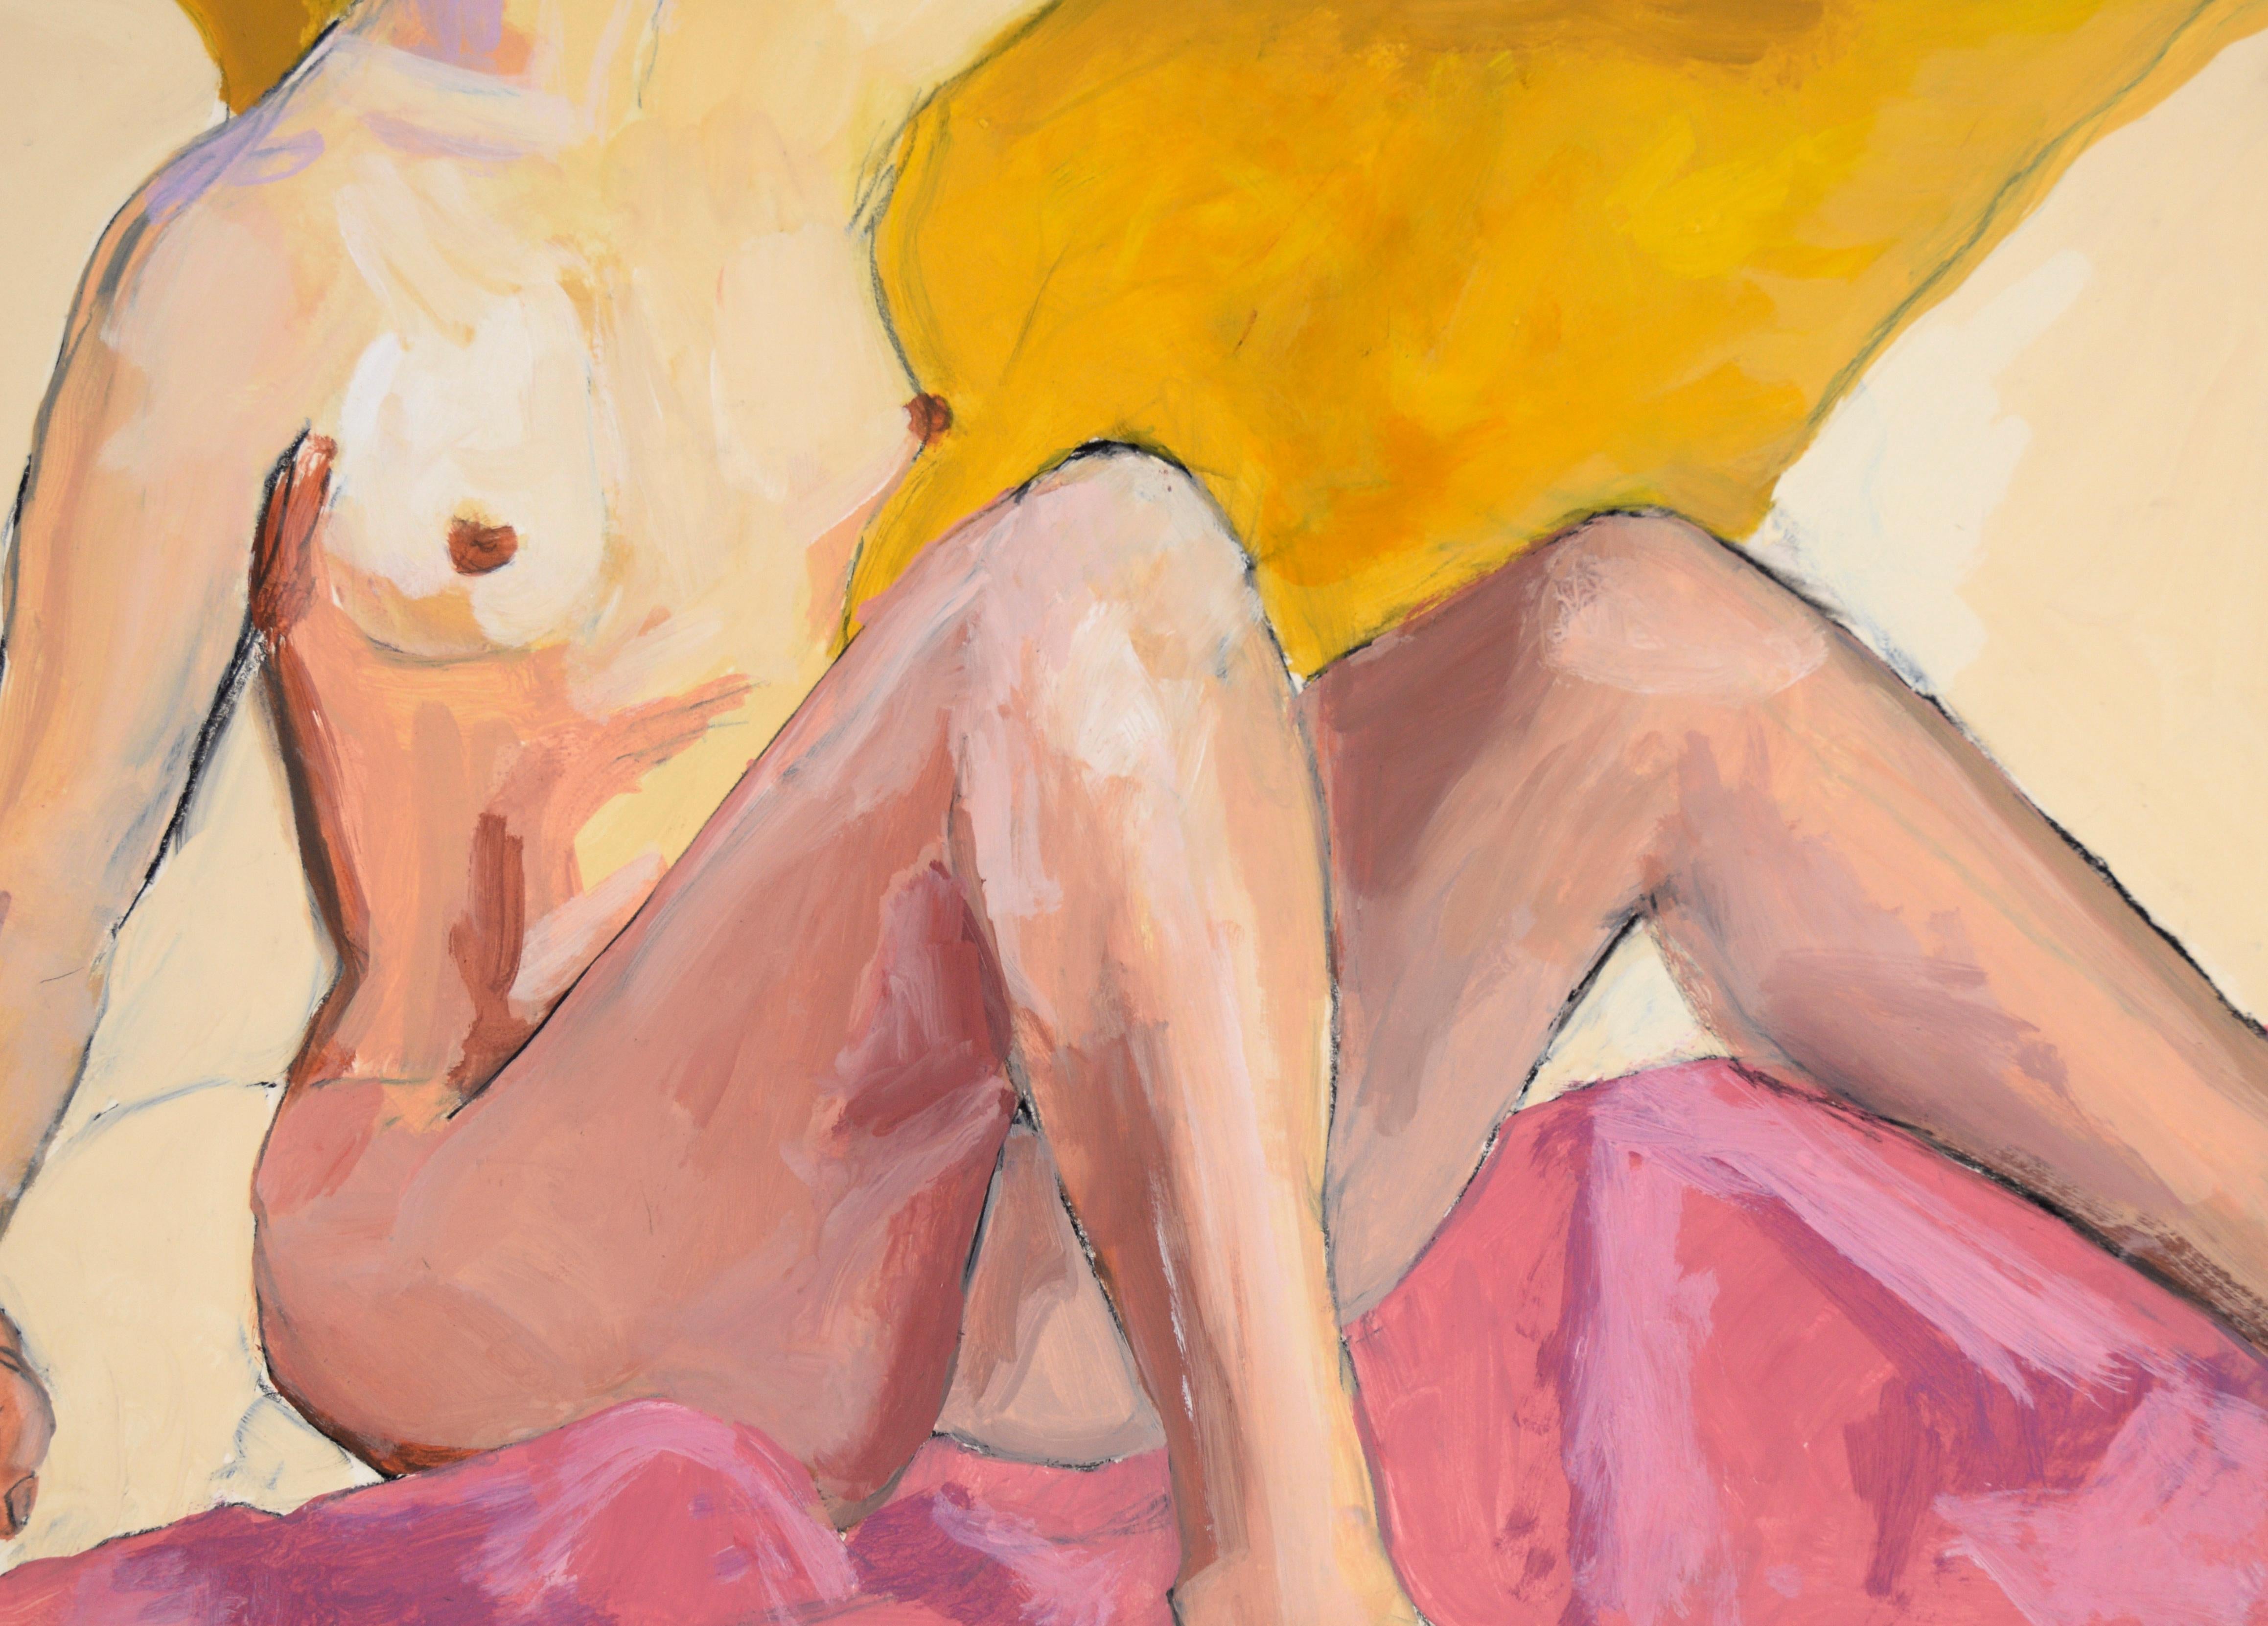 Nude Woman on Yellow Couch and Blanket in Acrylic on Paper

Bright painting of a nude woman by acclaimed bluegrass musician Katherine 